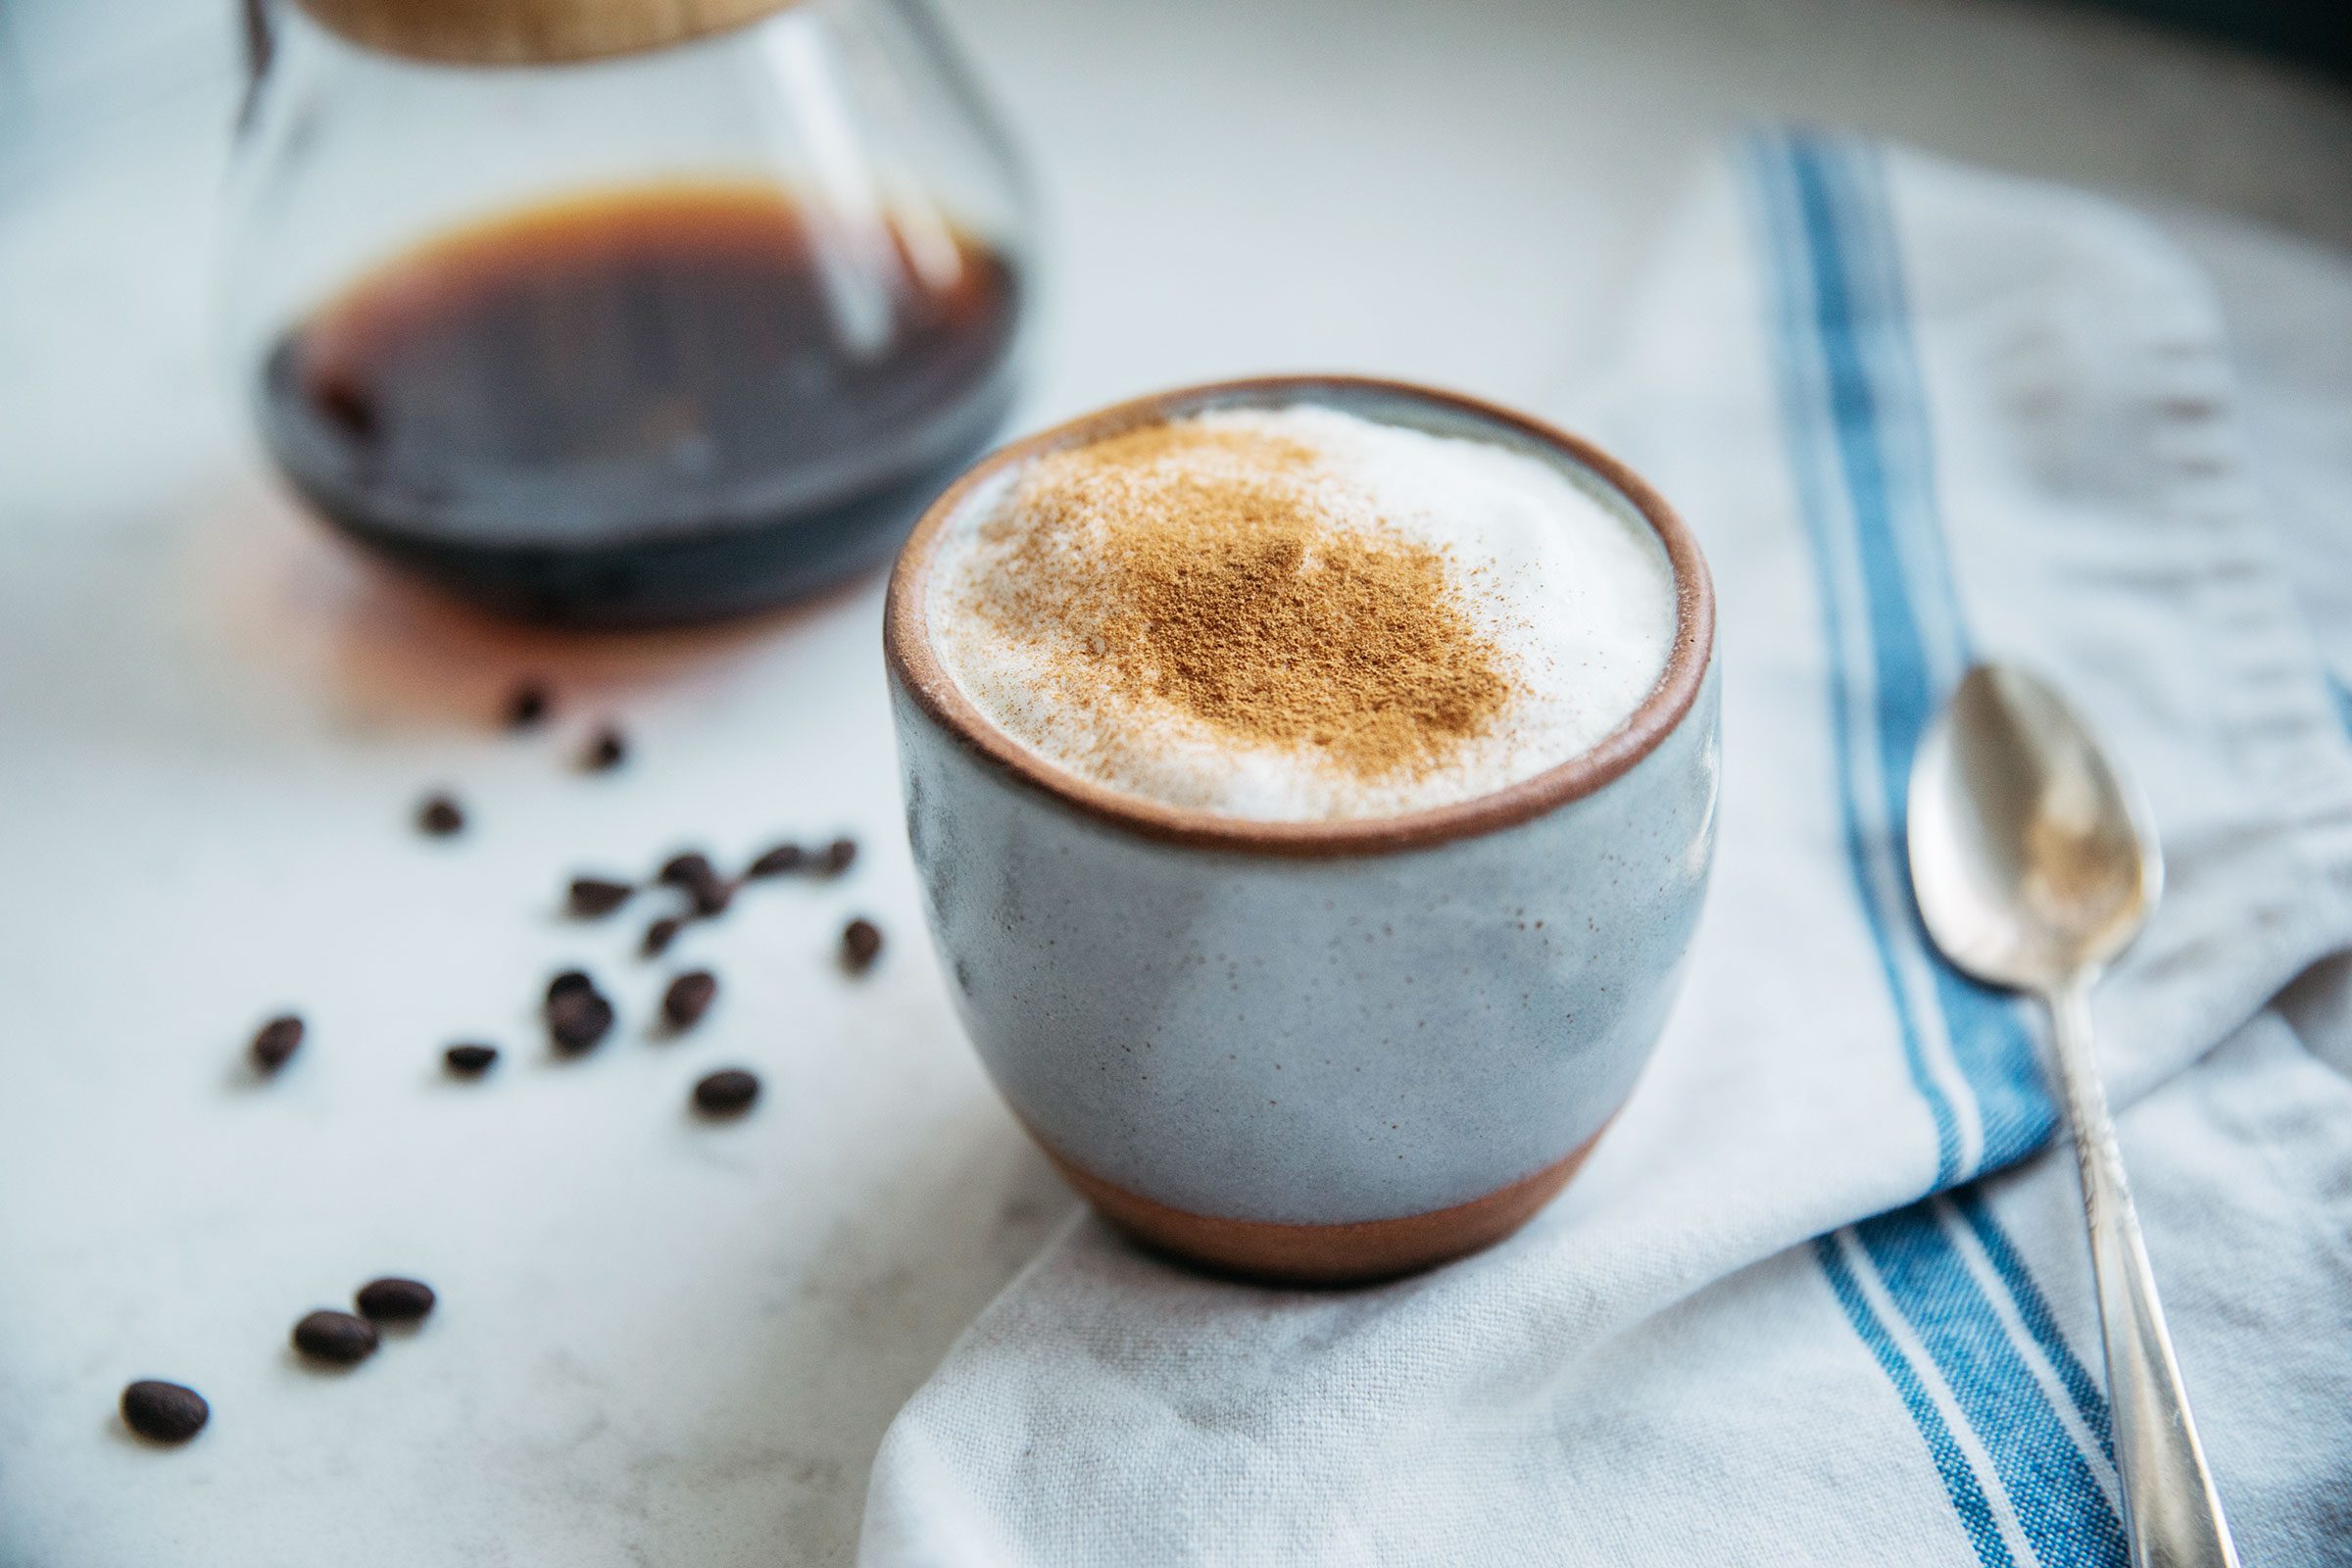 https://www.tasteofhome.com/wp-content/uploads/2020/04/how-to-make-a-latte-at-home-risa-lichtman-for-TOH.jpg?fit=700%2C1024